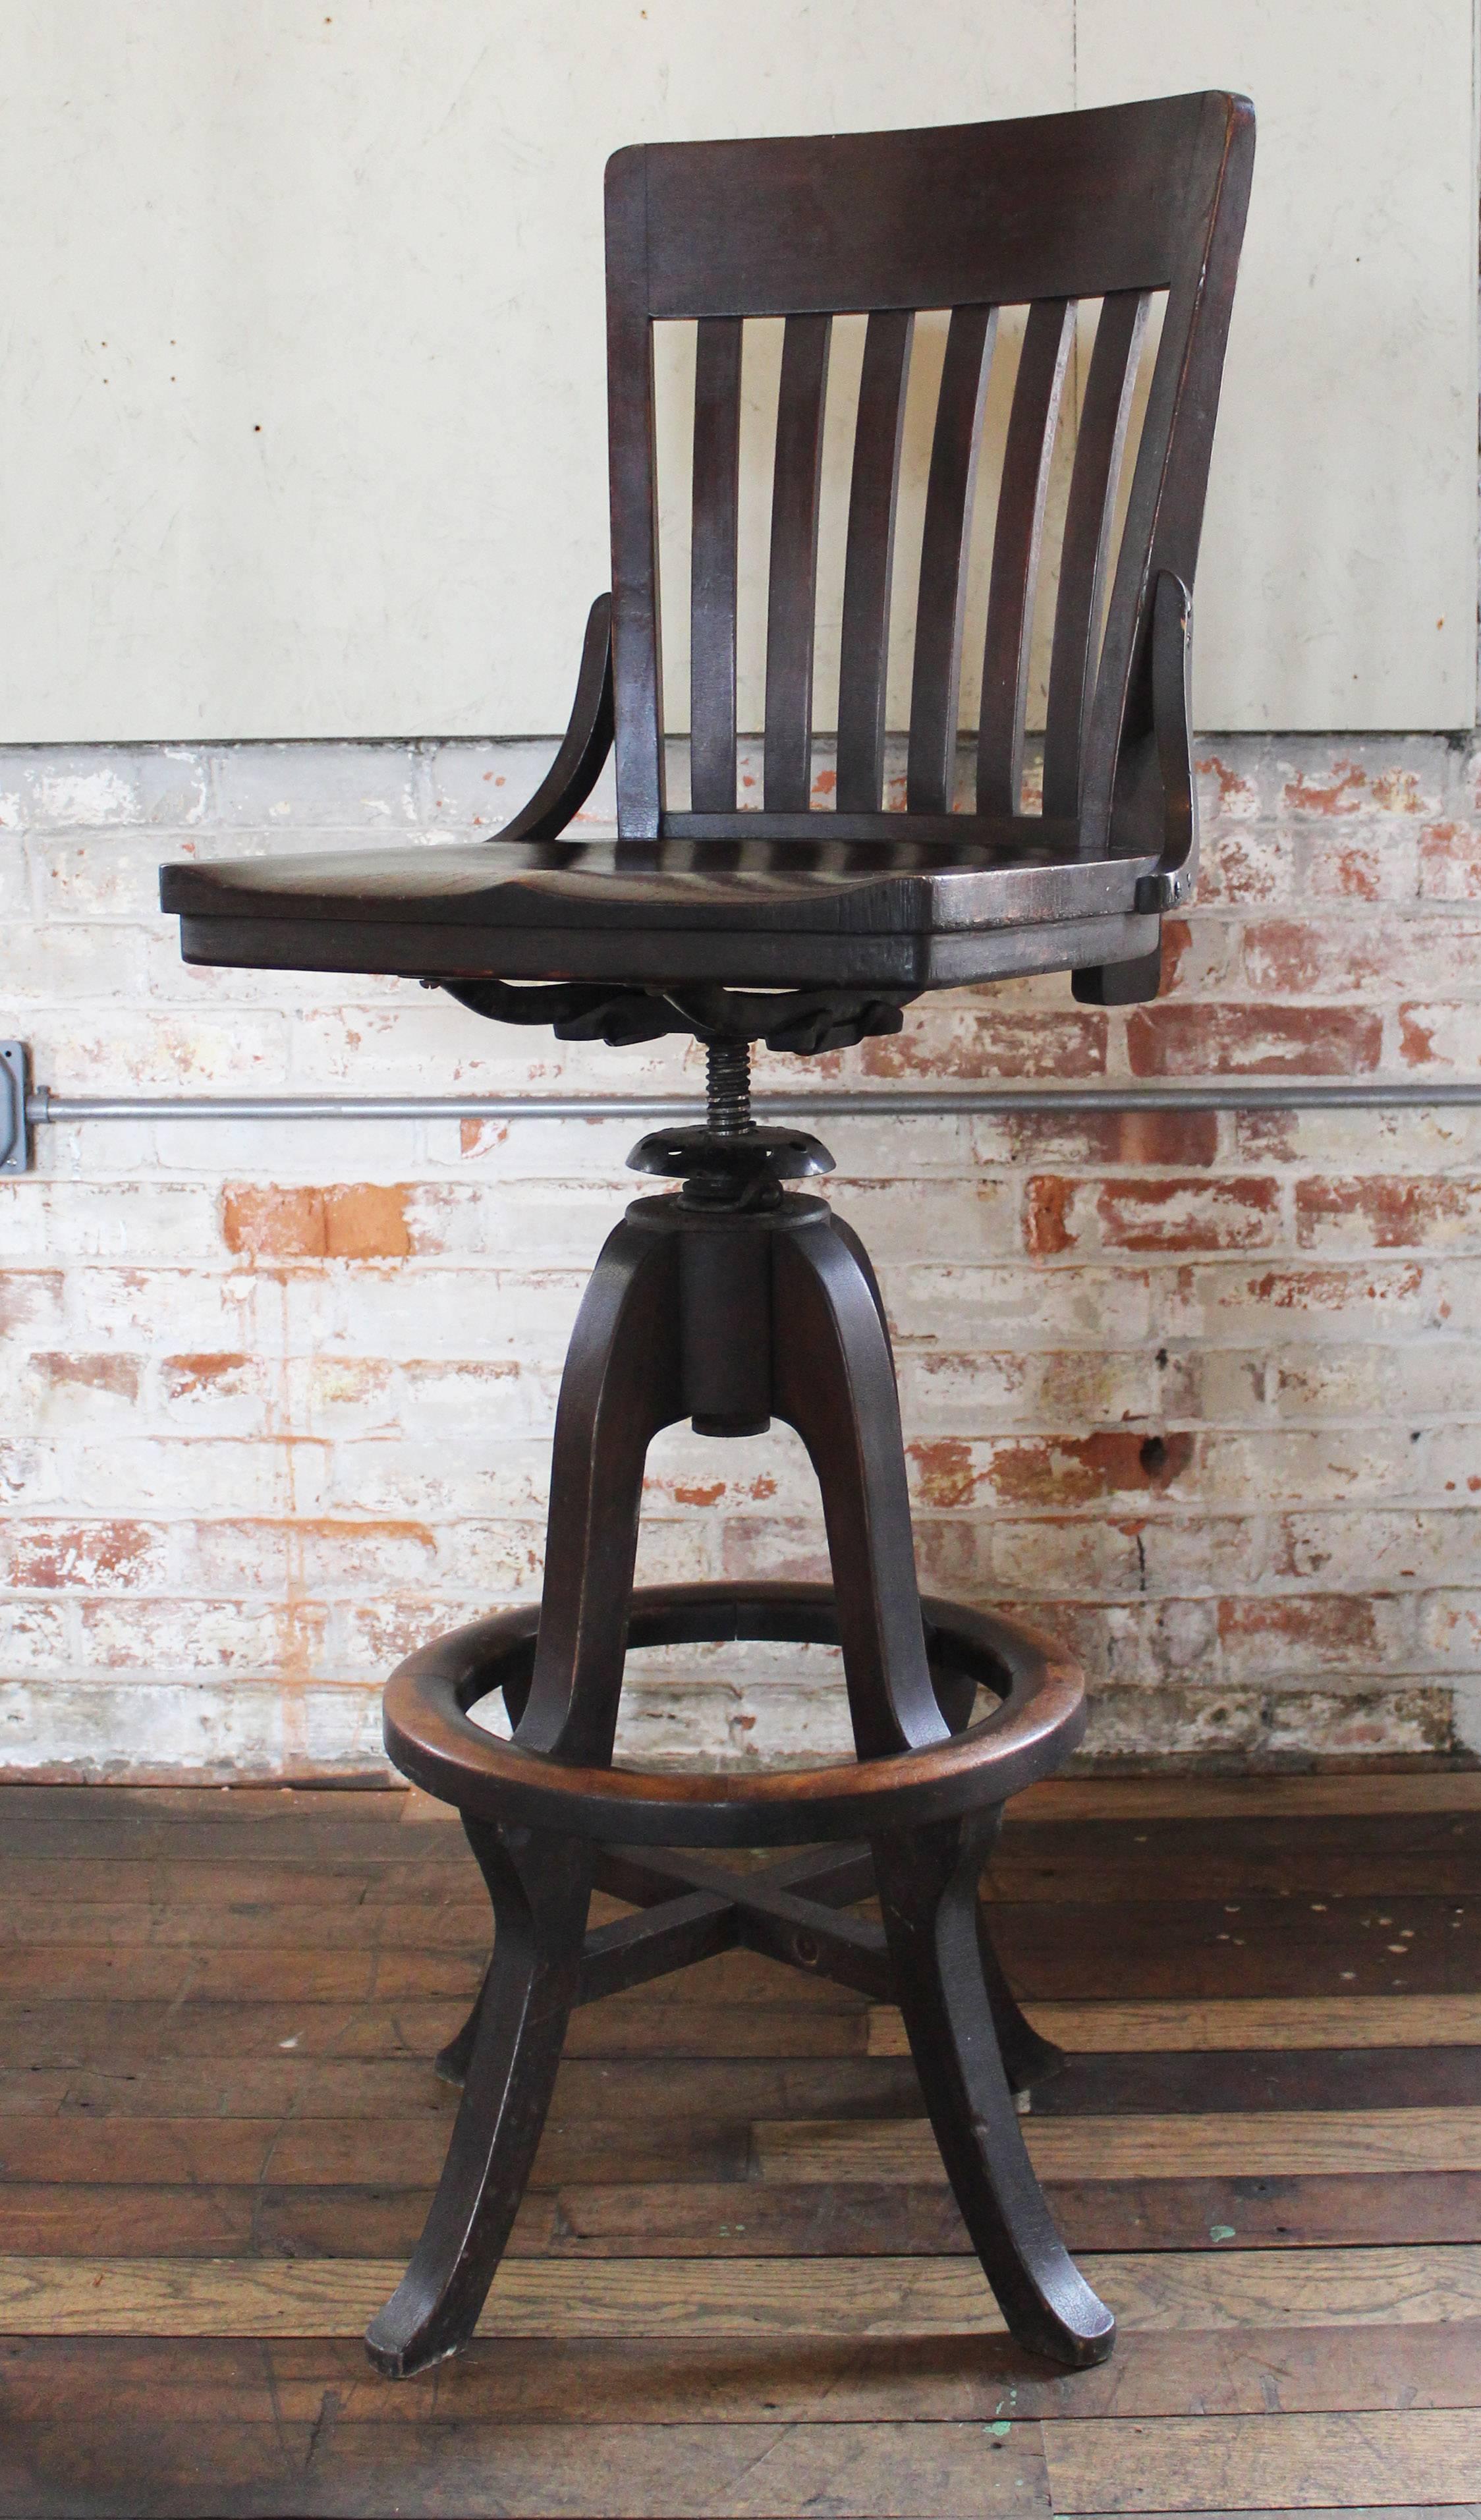 Clark & Gibby Drafting / Draftsman stool, wood and metal hardware. Overall dimensions are 19 1/2